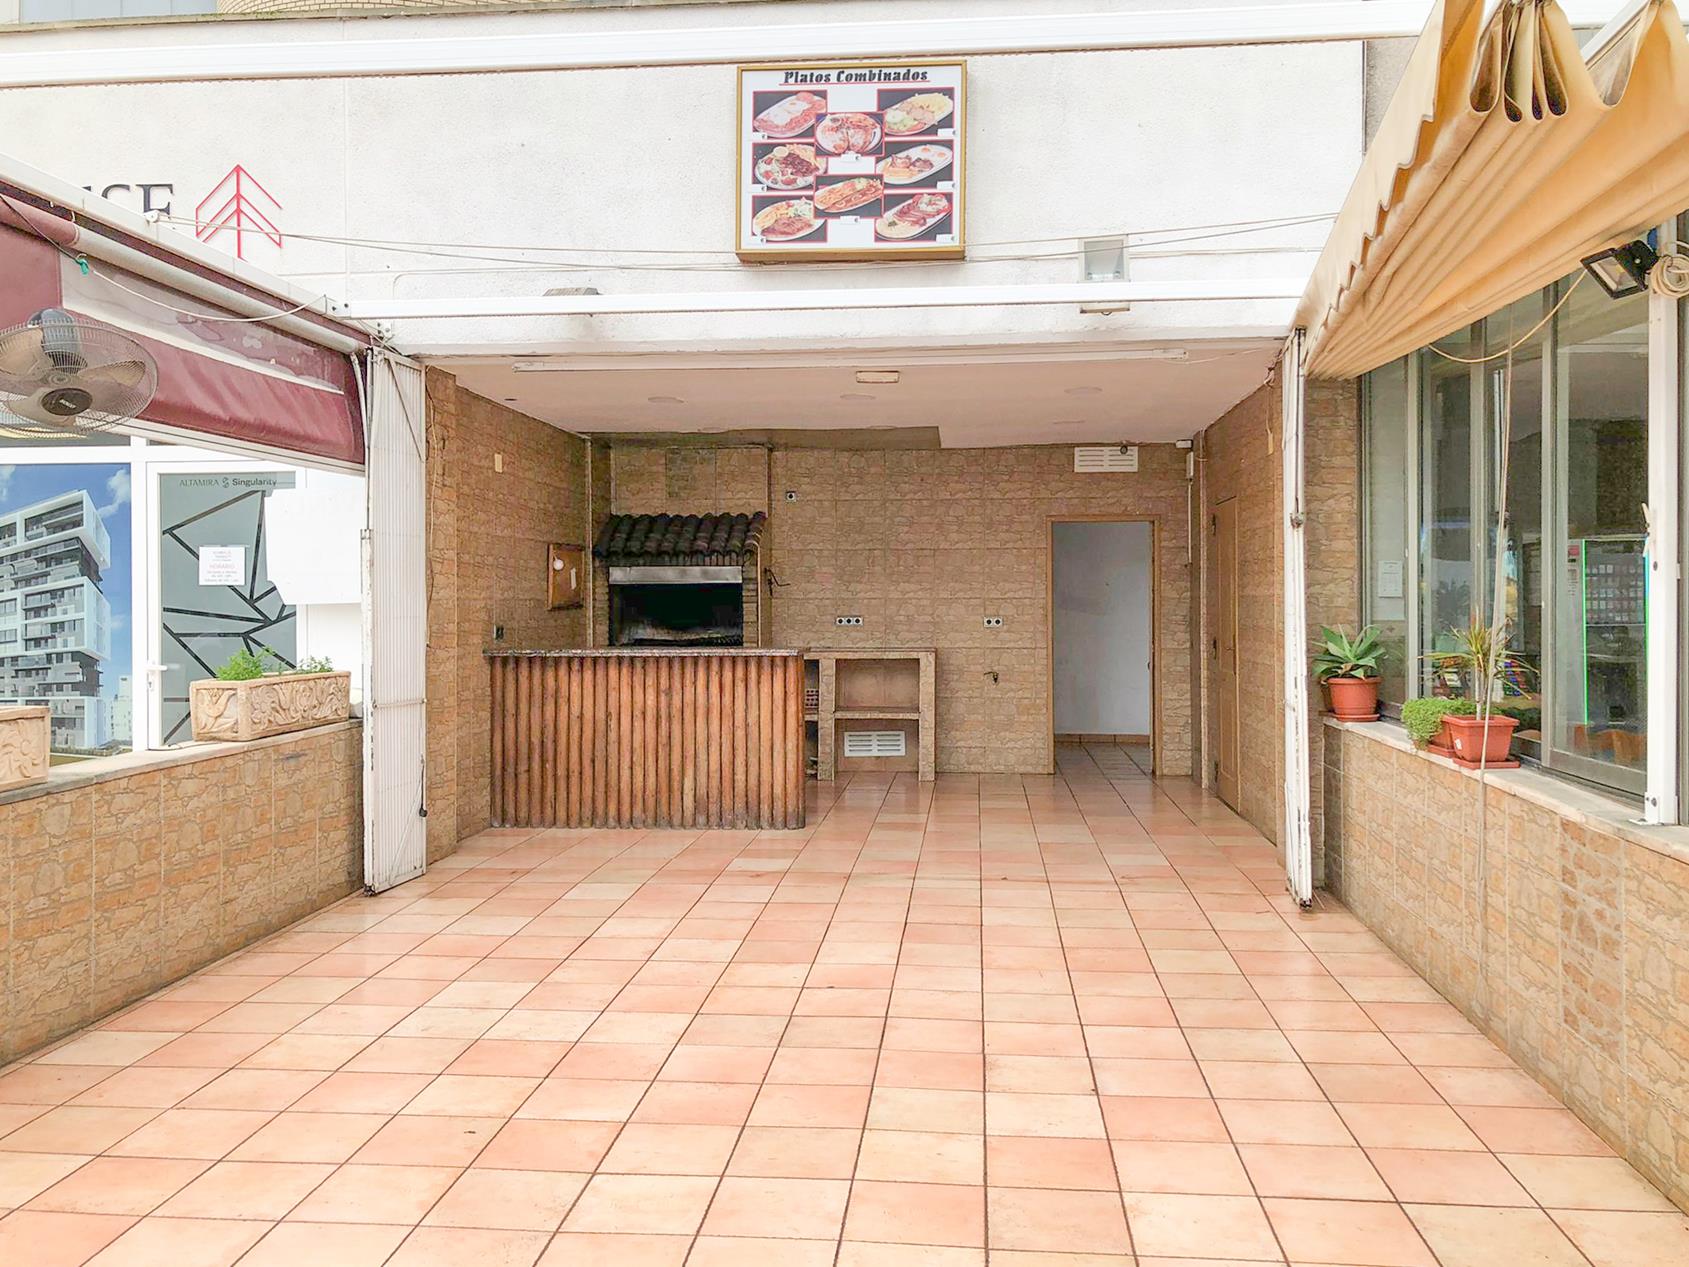 Local for sale in Calpe